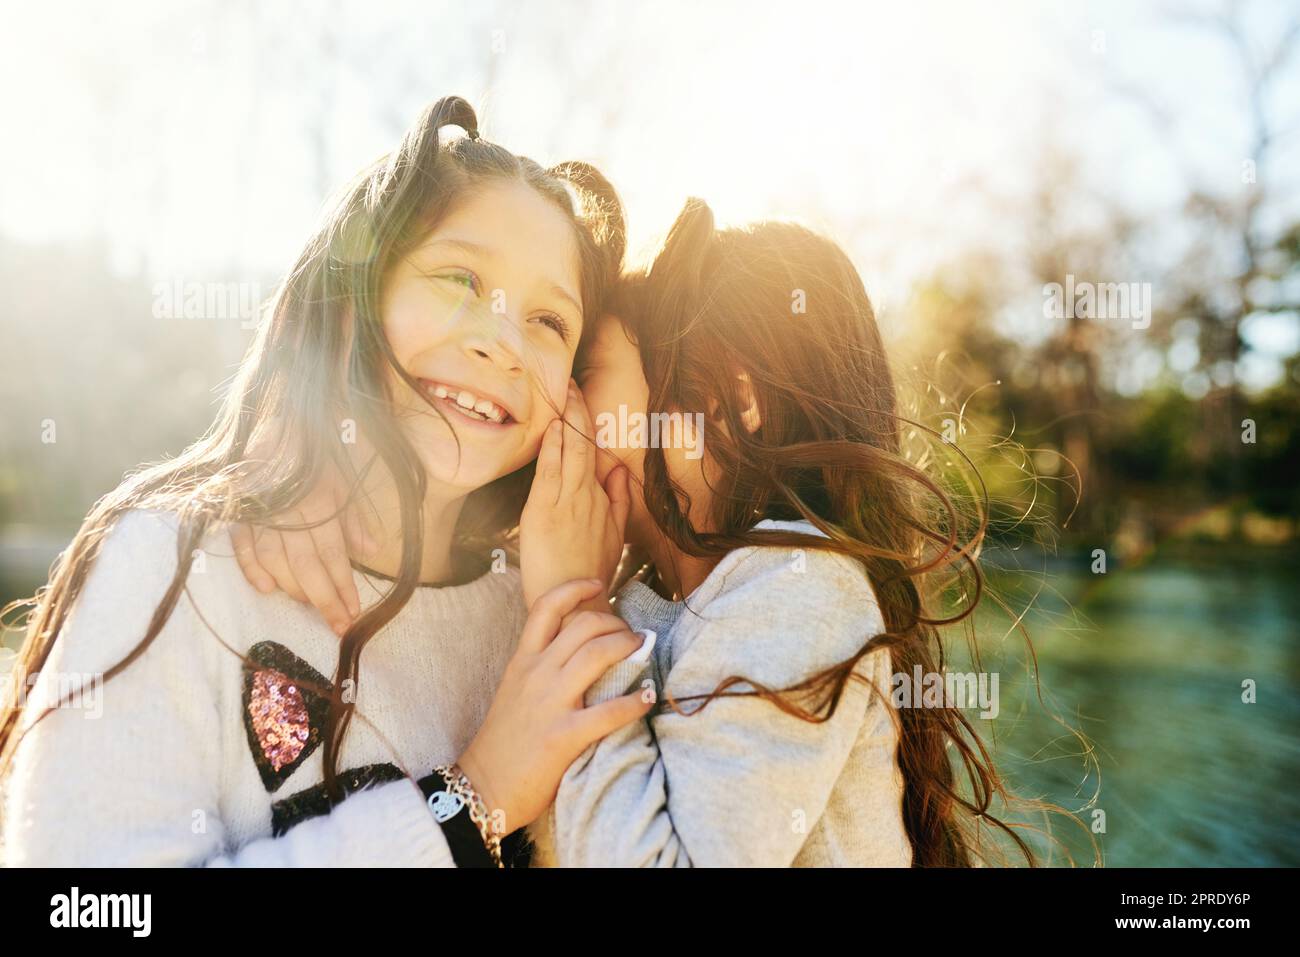 Sisters always keep secrets. an adorable little girl whispering in her sisters ear outdoors. Stock Photo